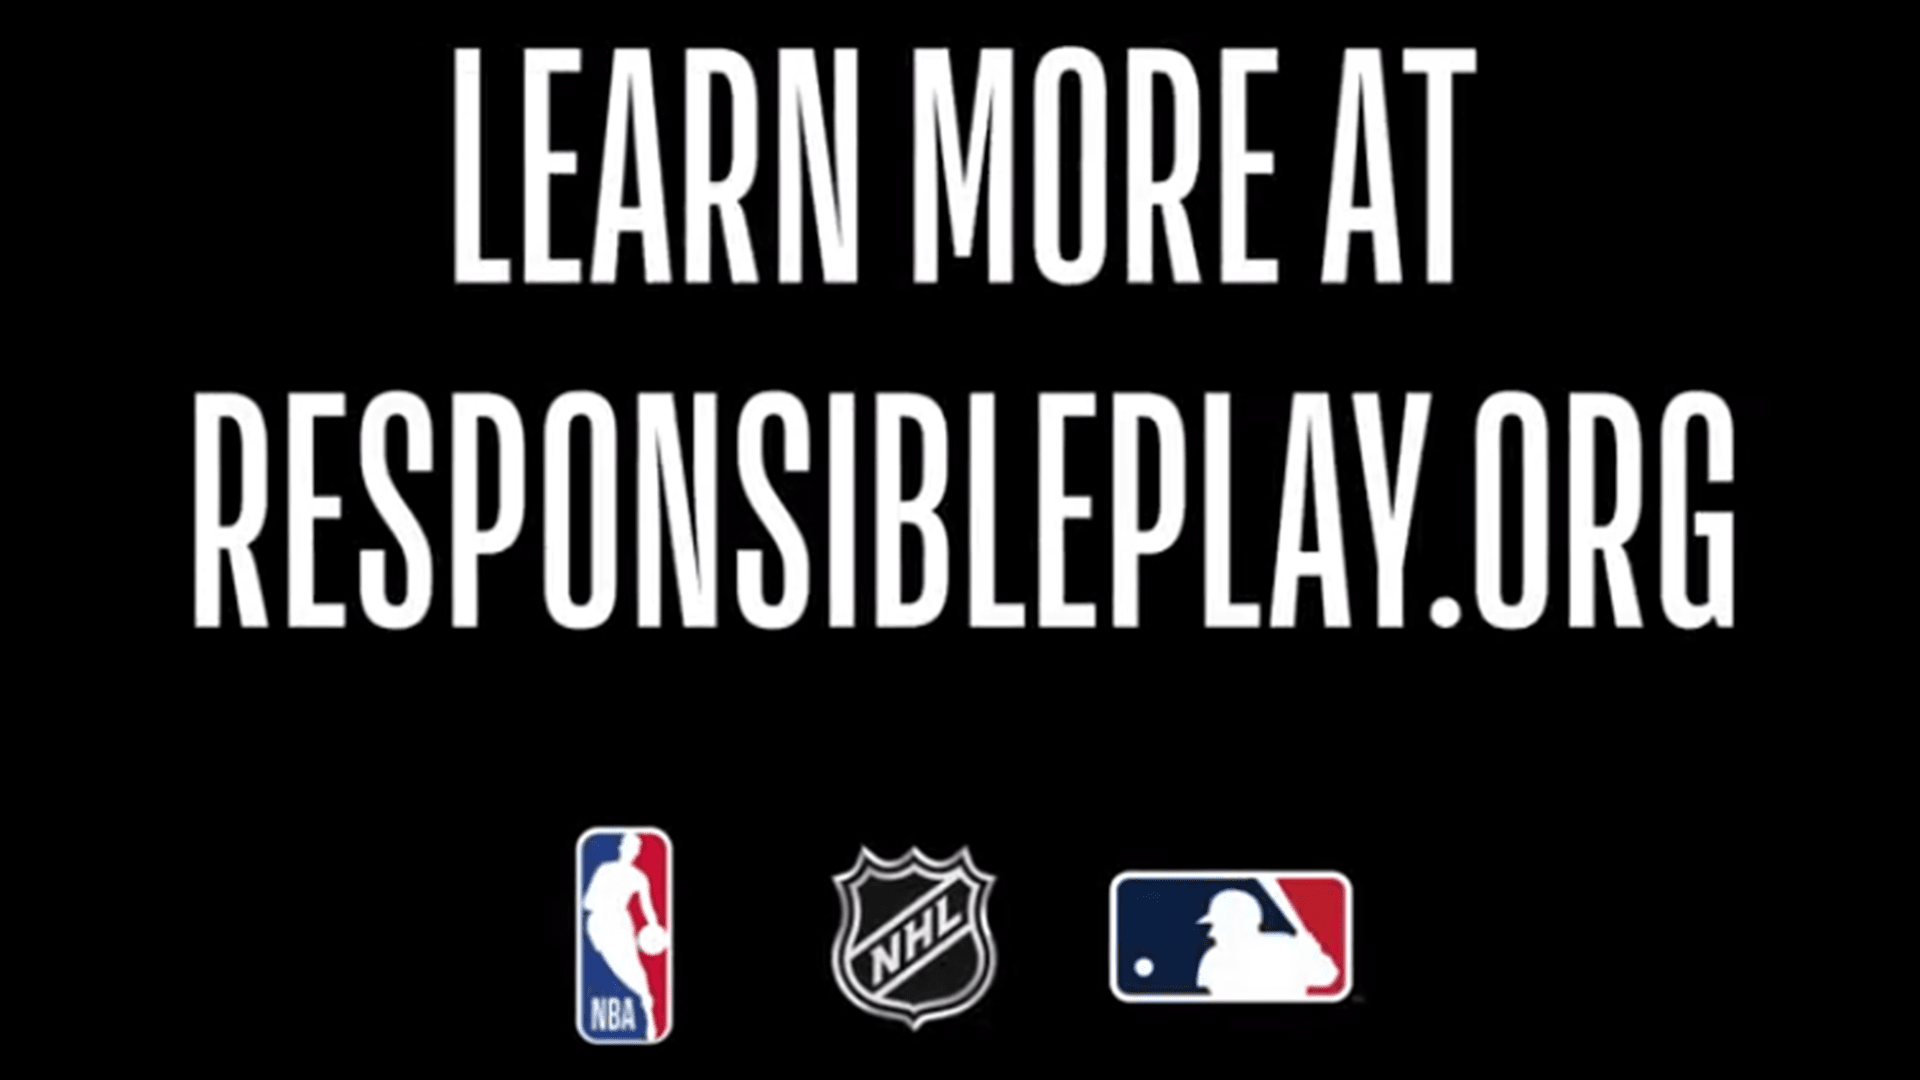 The words 'Learn more at responsibleplay.org' with the NBA, NHL and MLB logos